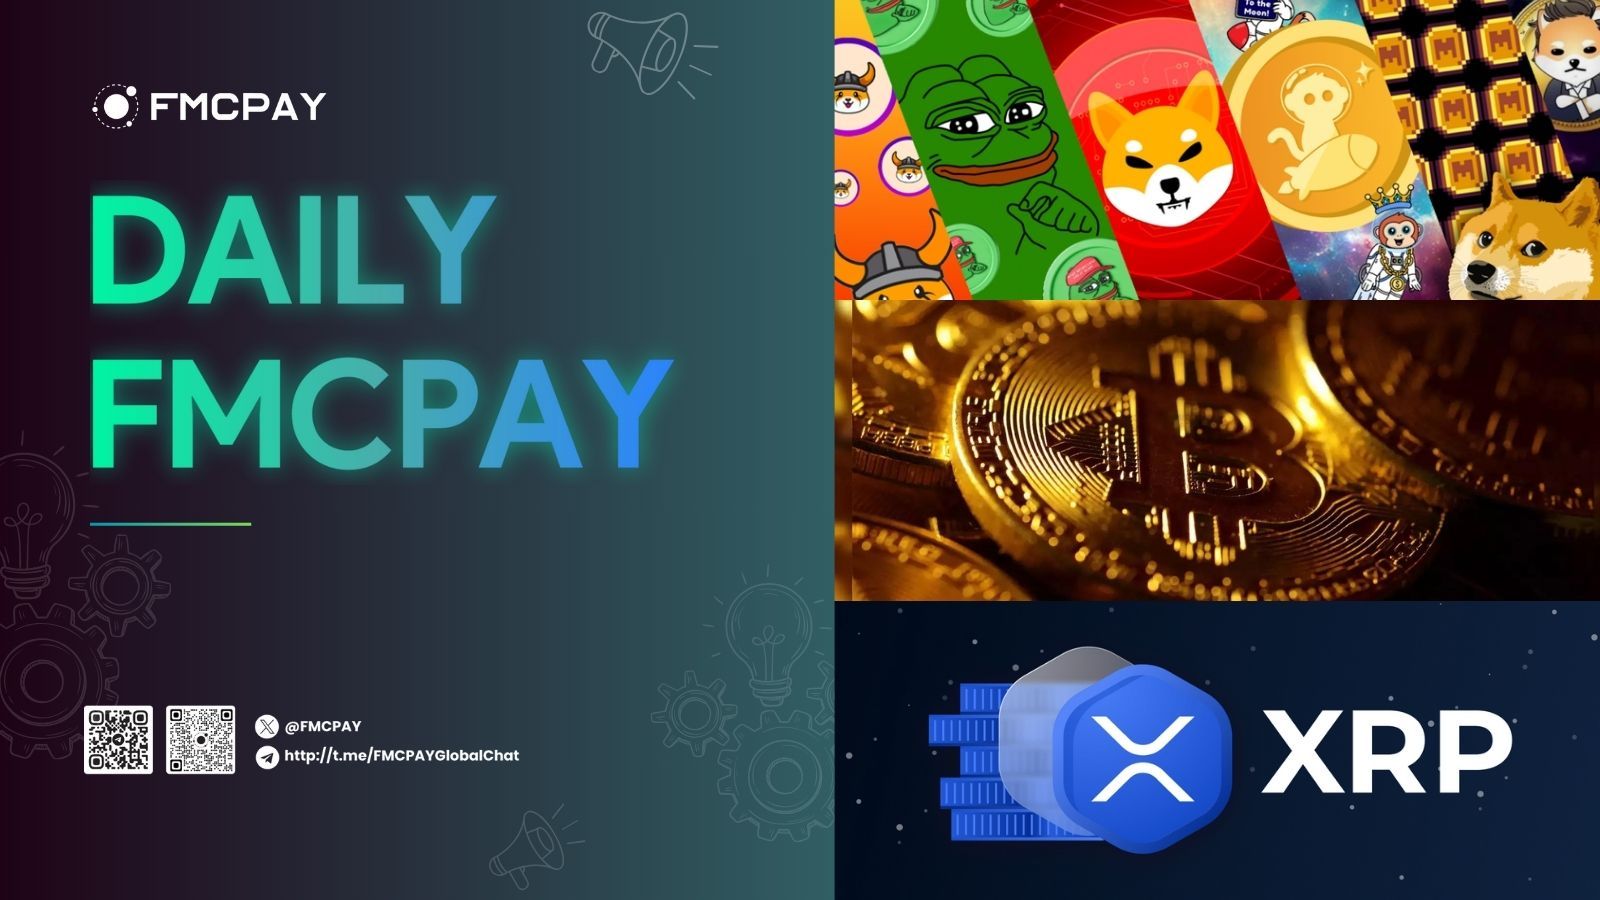 fmcpay are memecoins driving the crypto boom after bitcoin halving